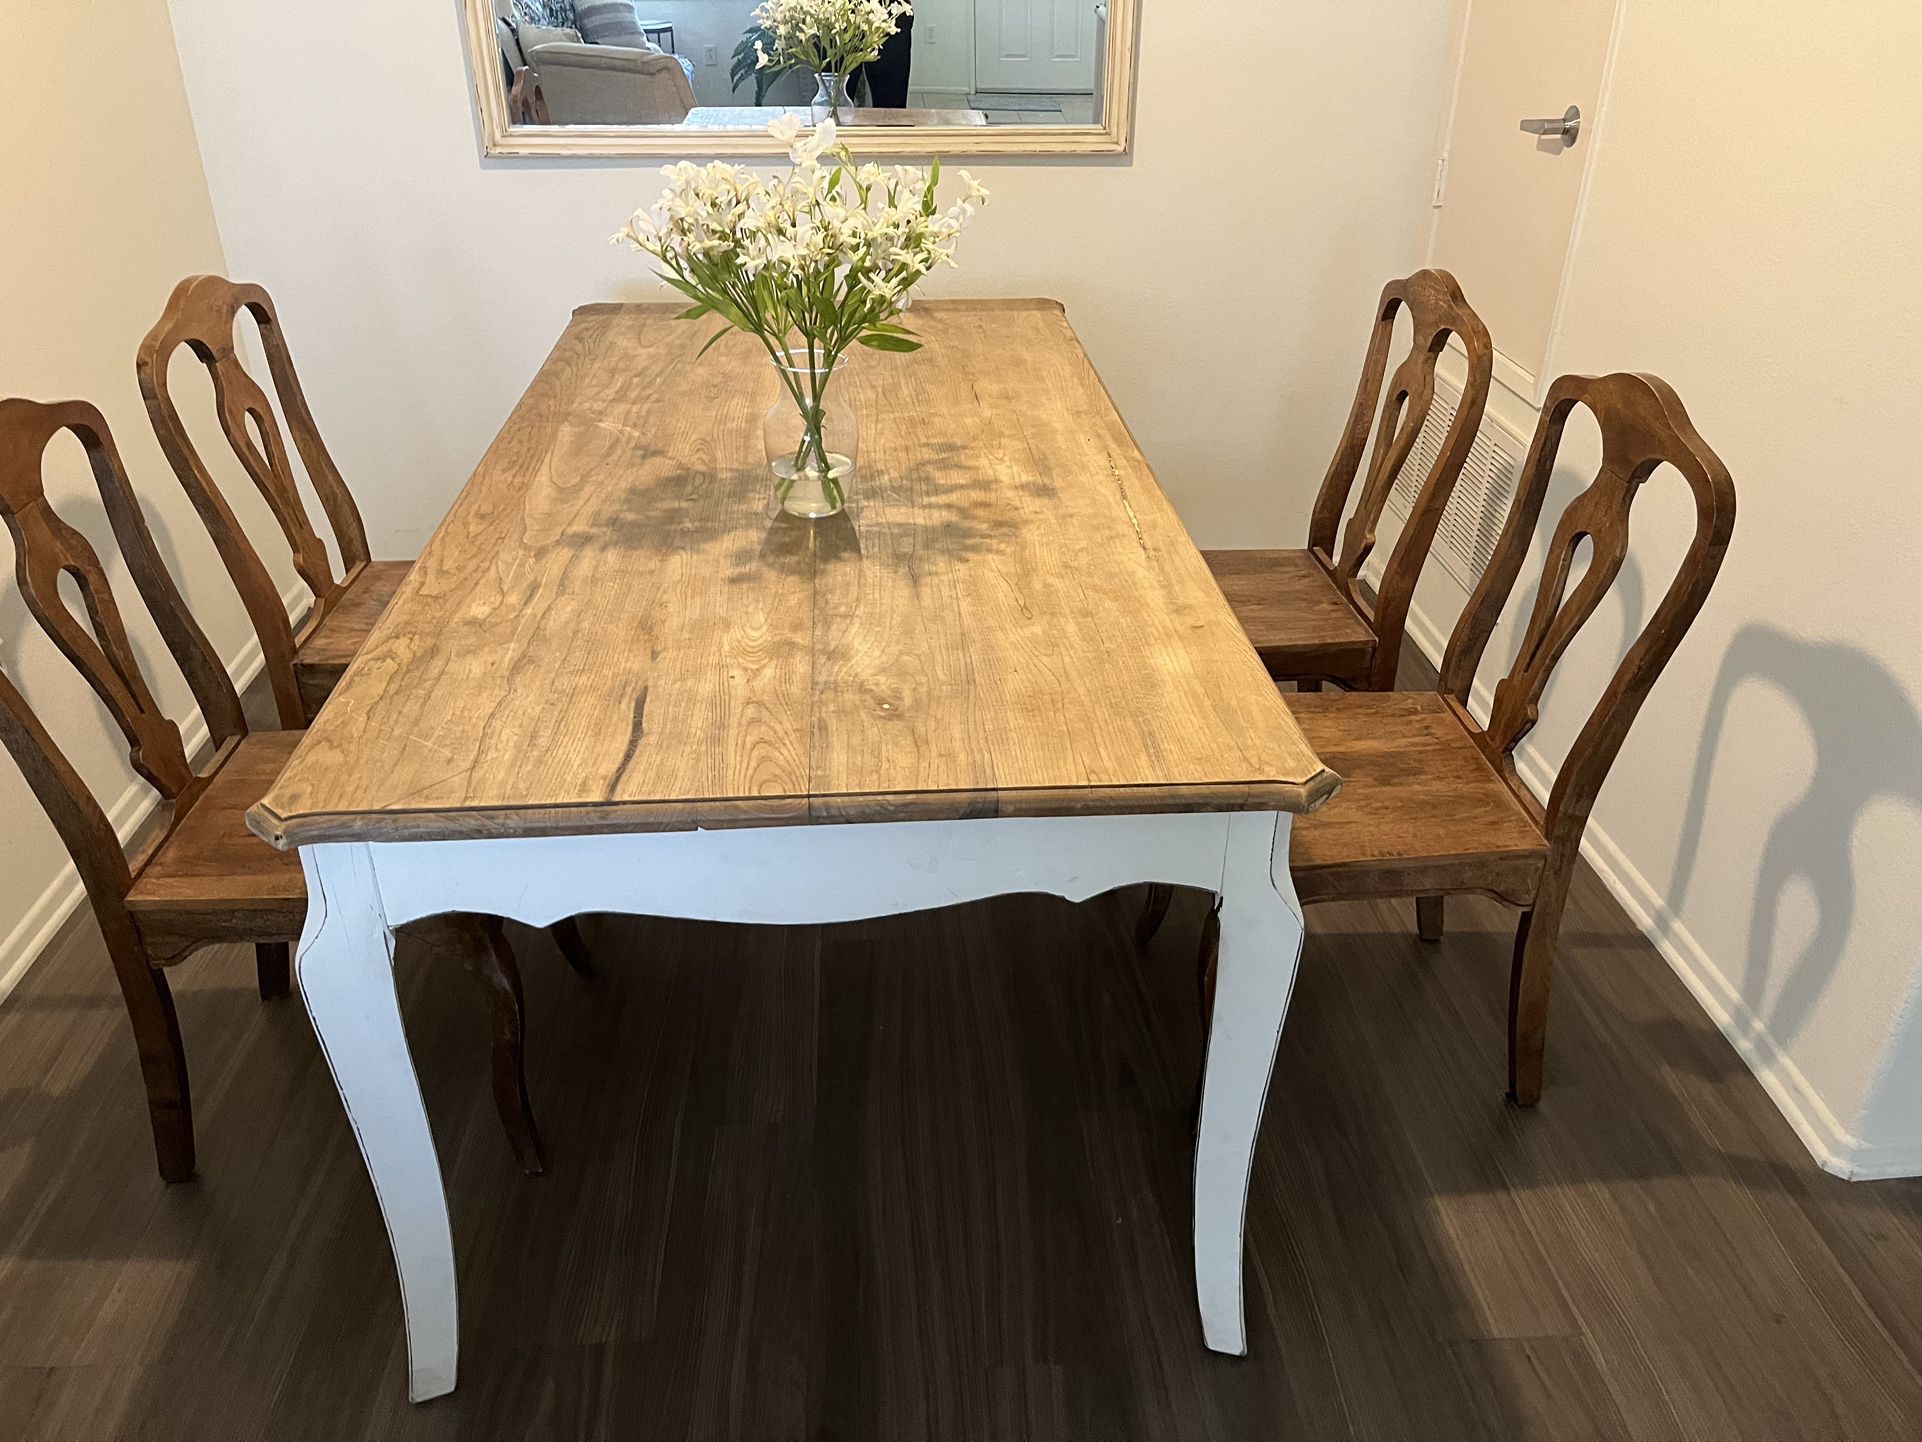 Dining Room Table - Farmhouse Style with 4 Chairs 